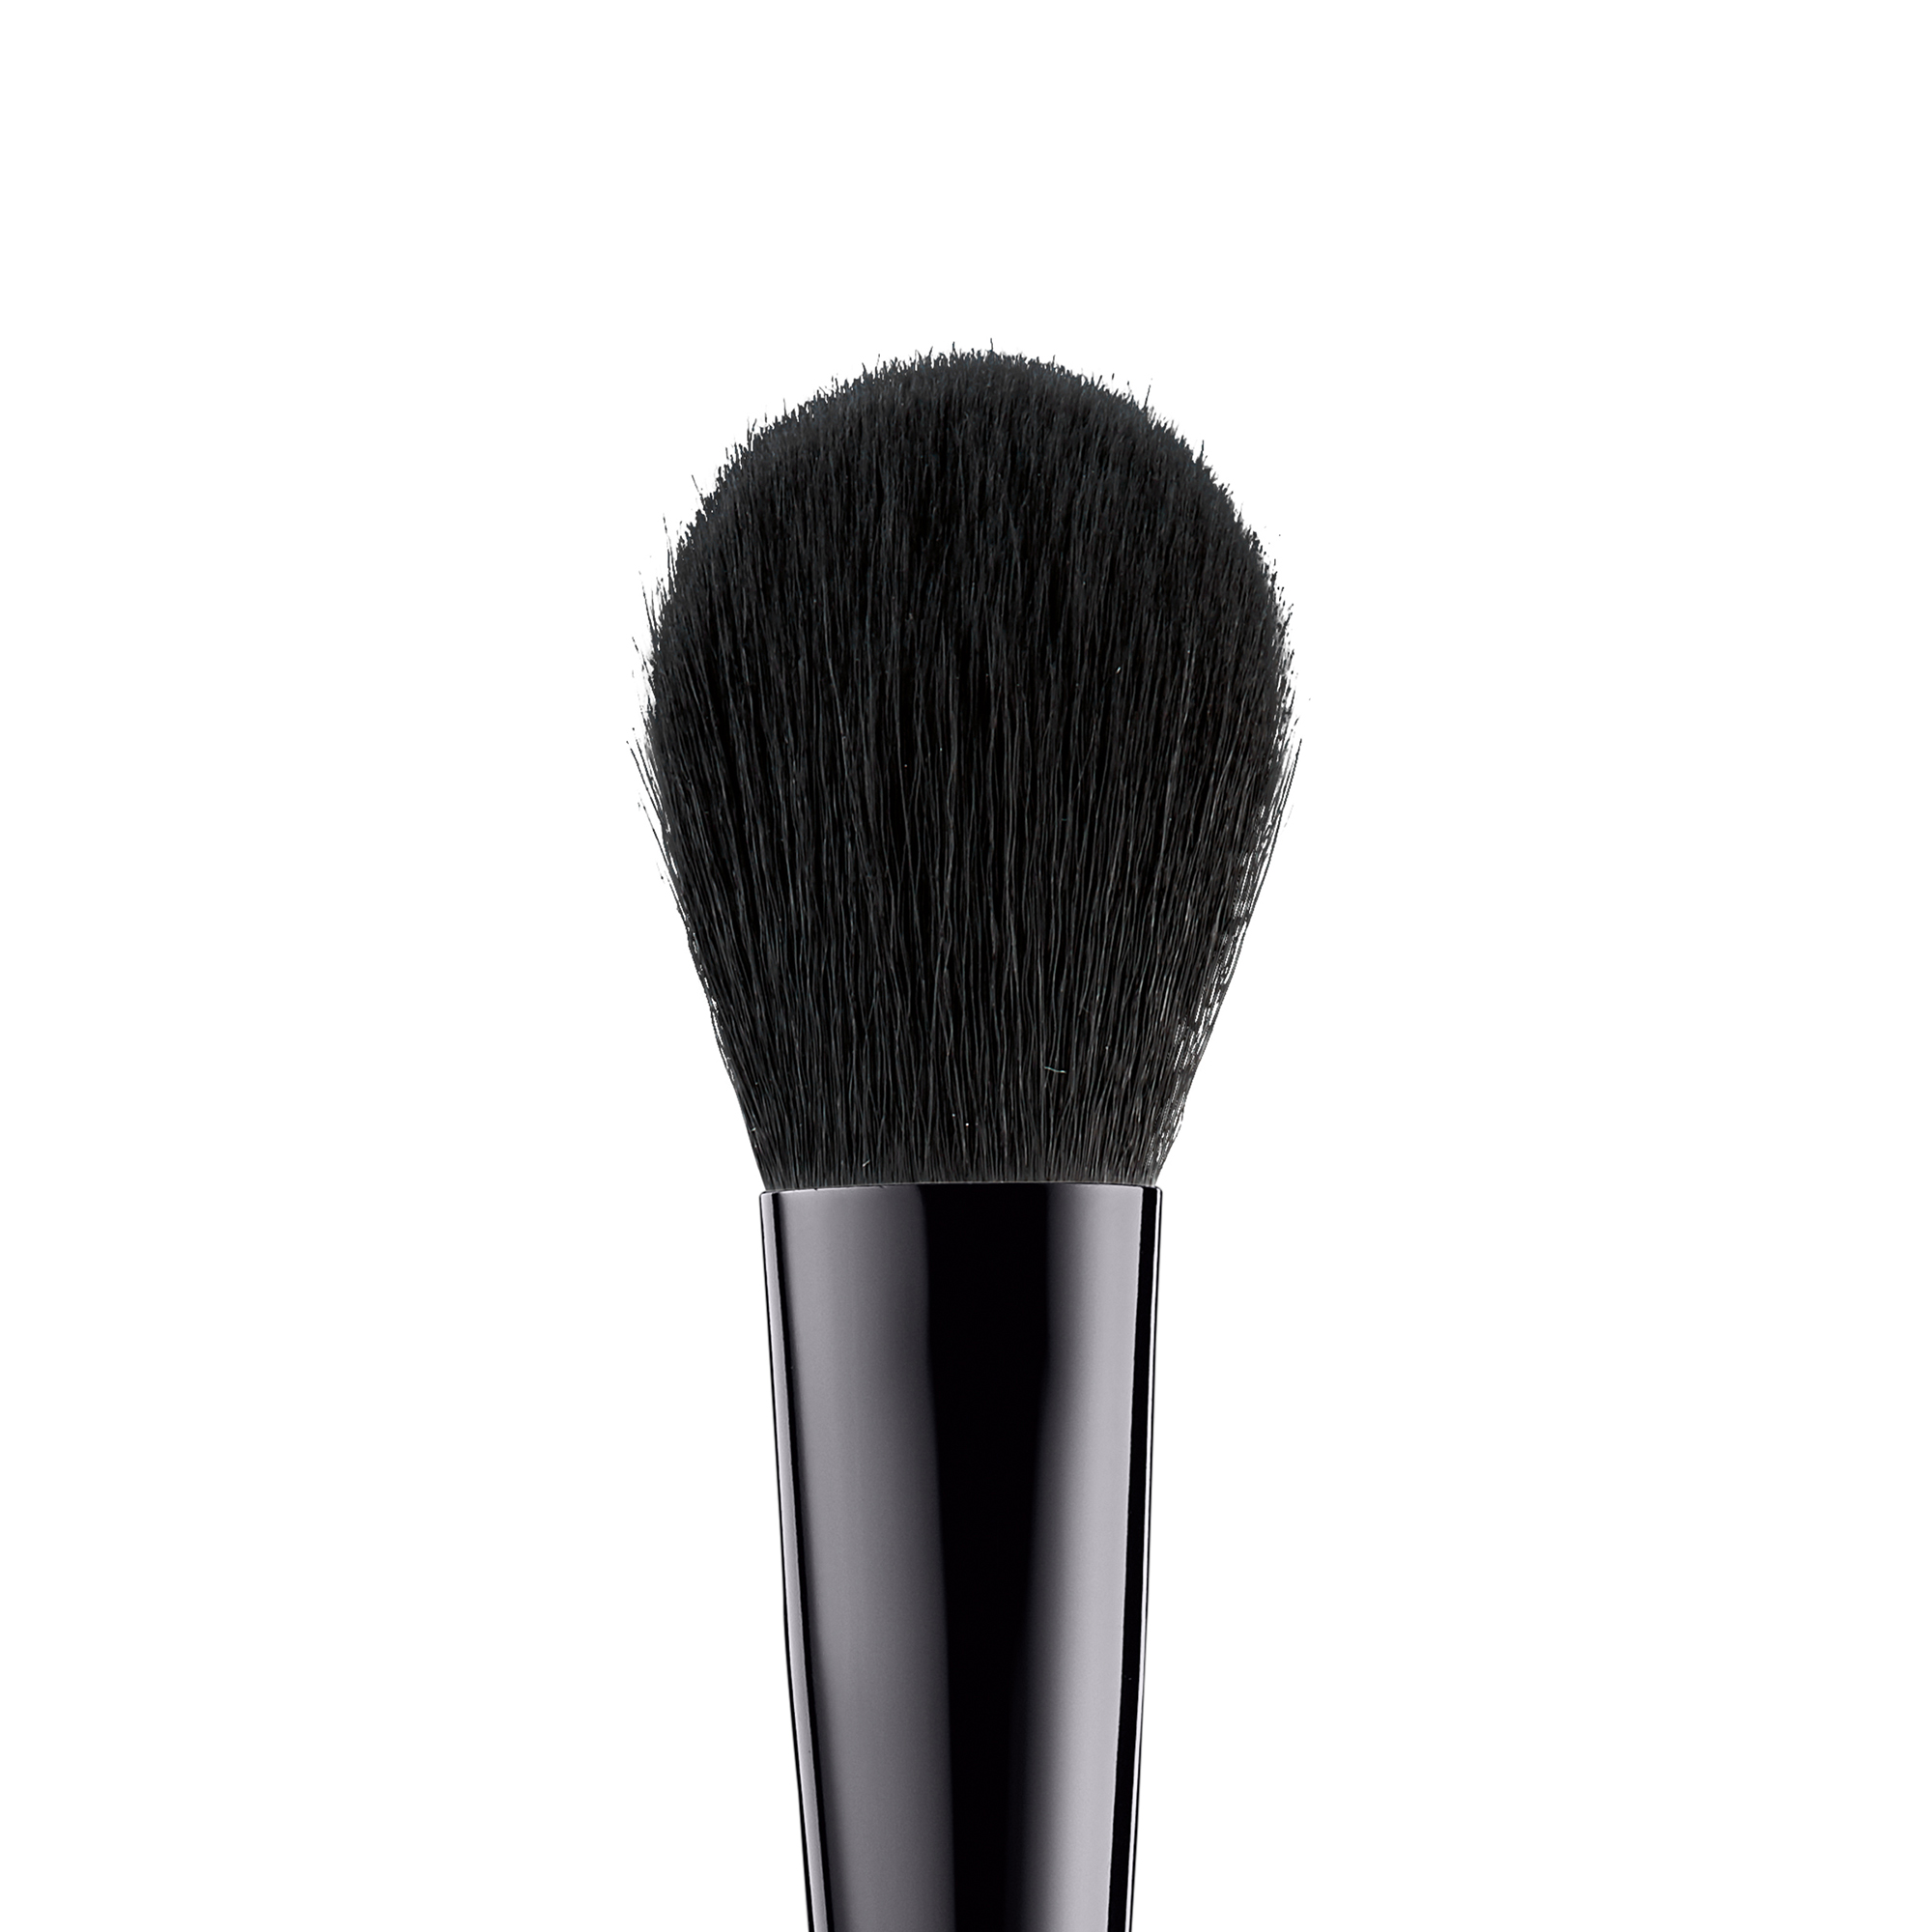 e.l.f Blush Brush for Precision Application, Synthetic - image 2 of 4